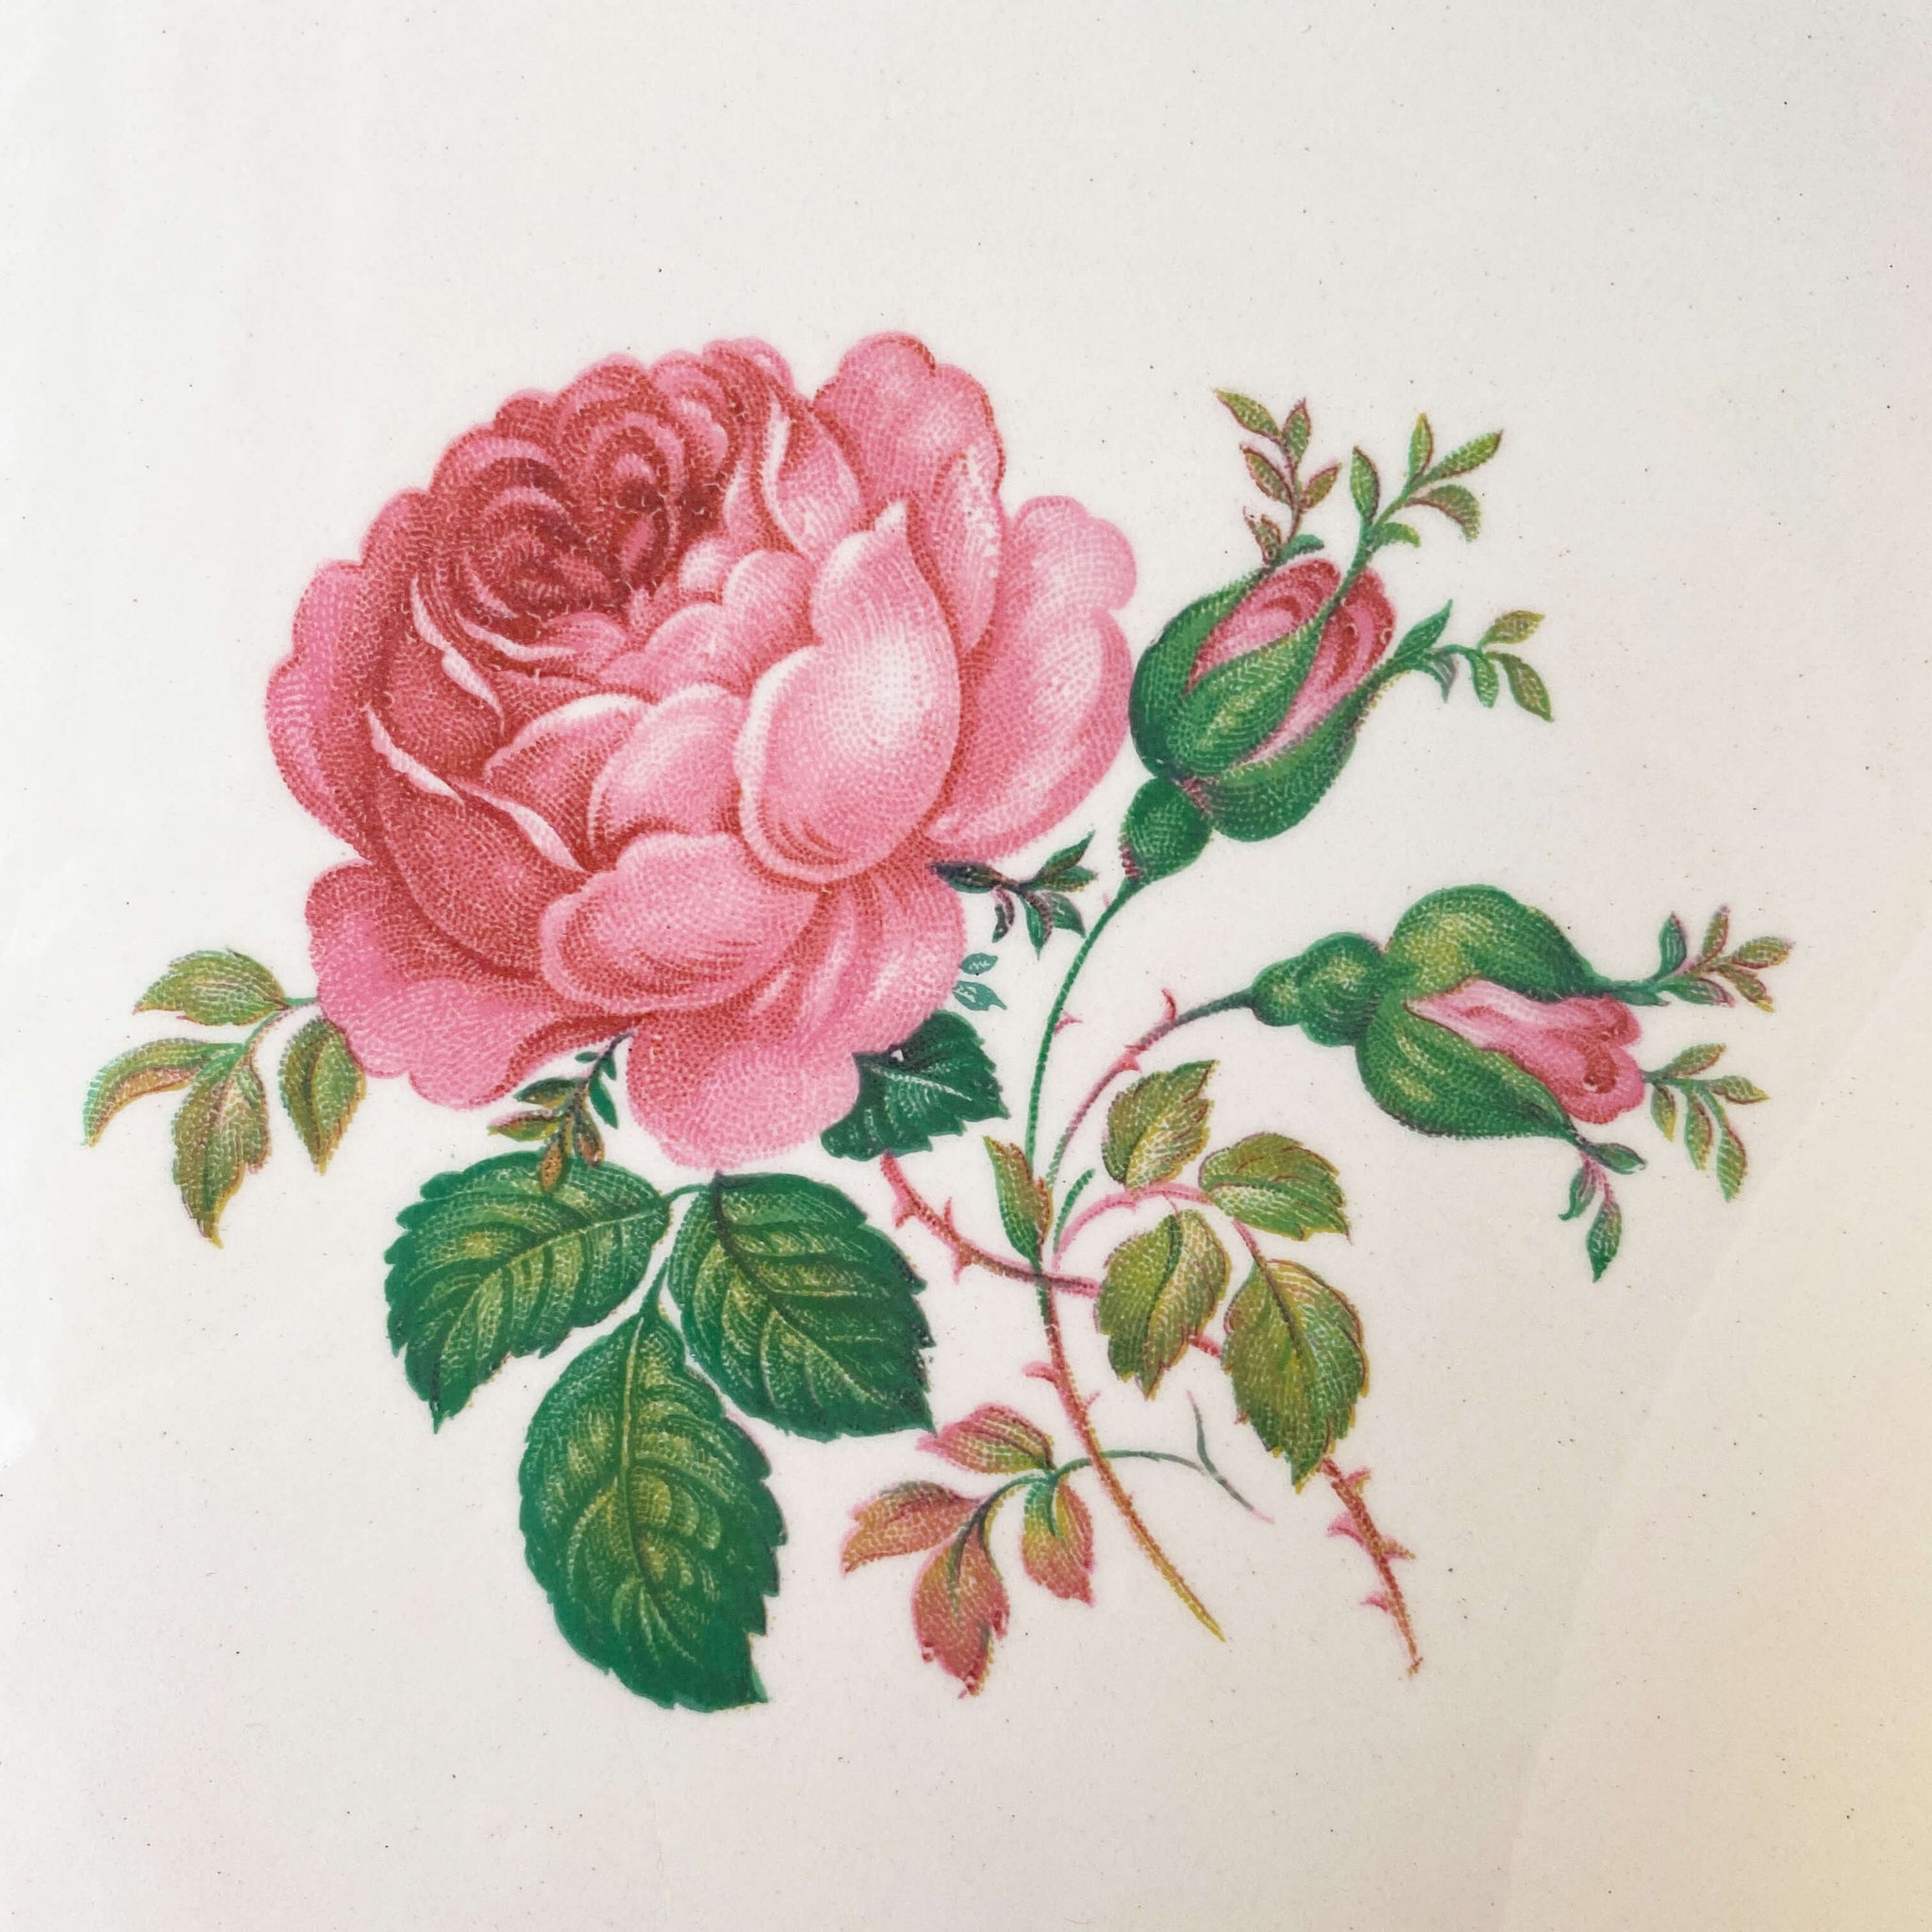 Vintage 1940s Pink Rose Luncheon Plates - Taylor Smith Taylor circa 1948